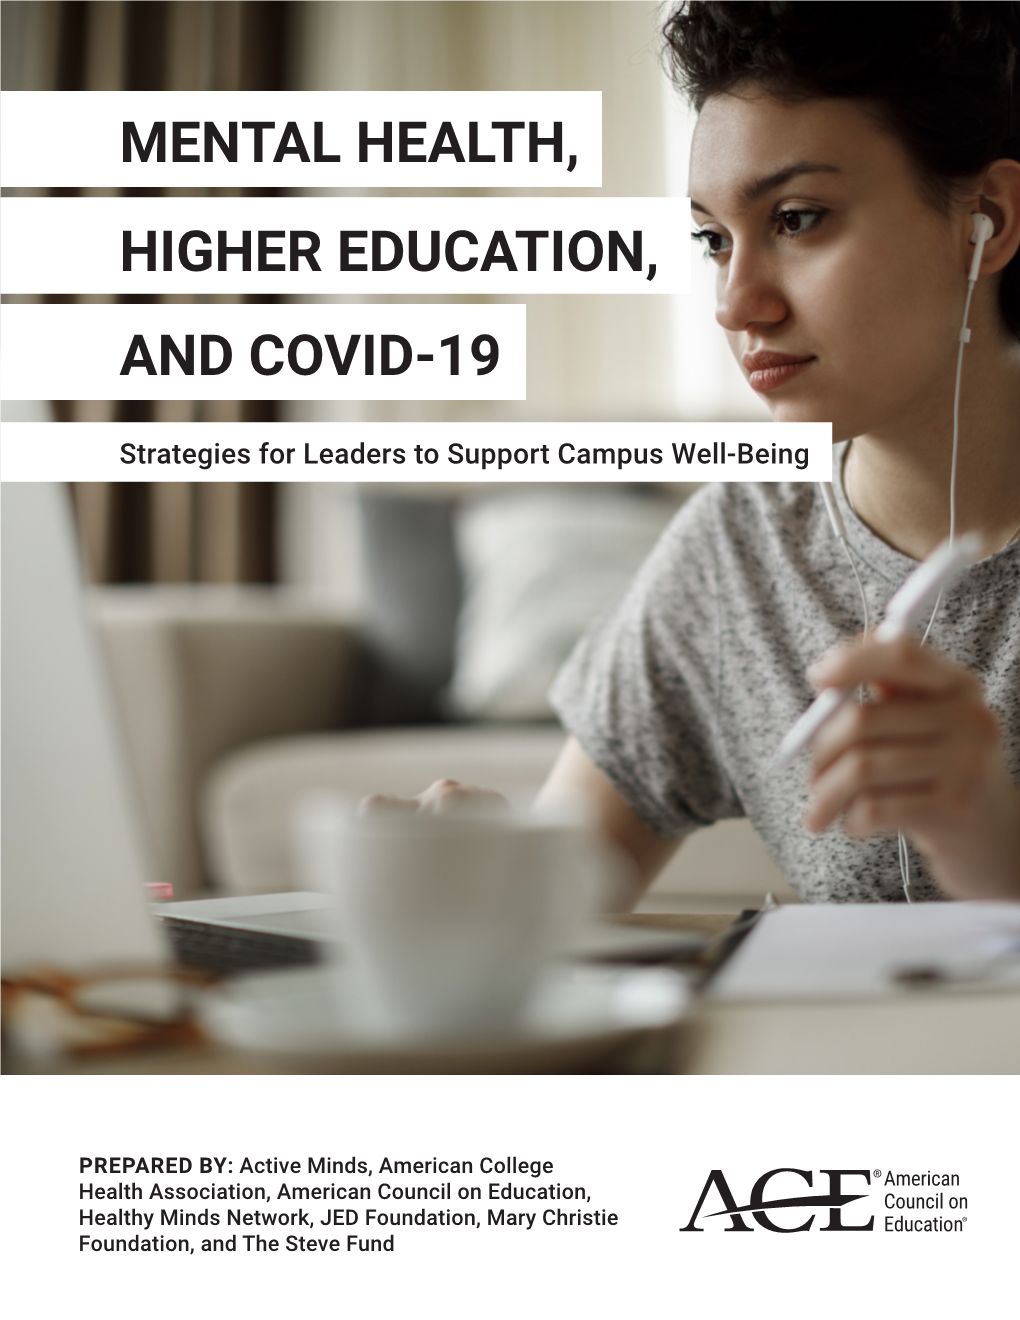 Mental Health, Higher Education, and Covid-19